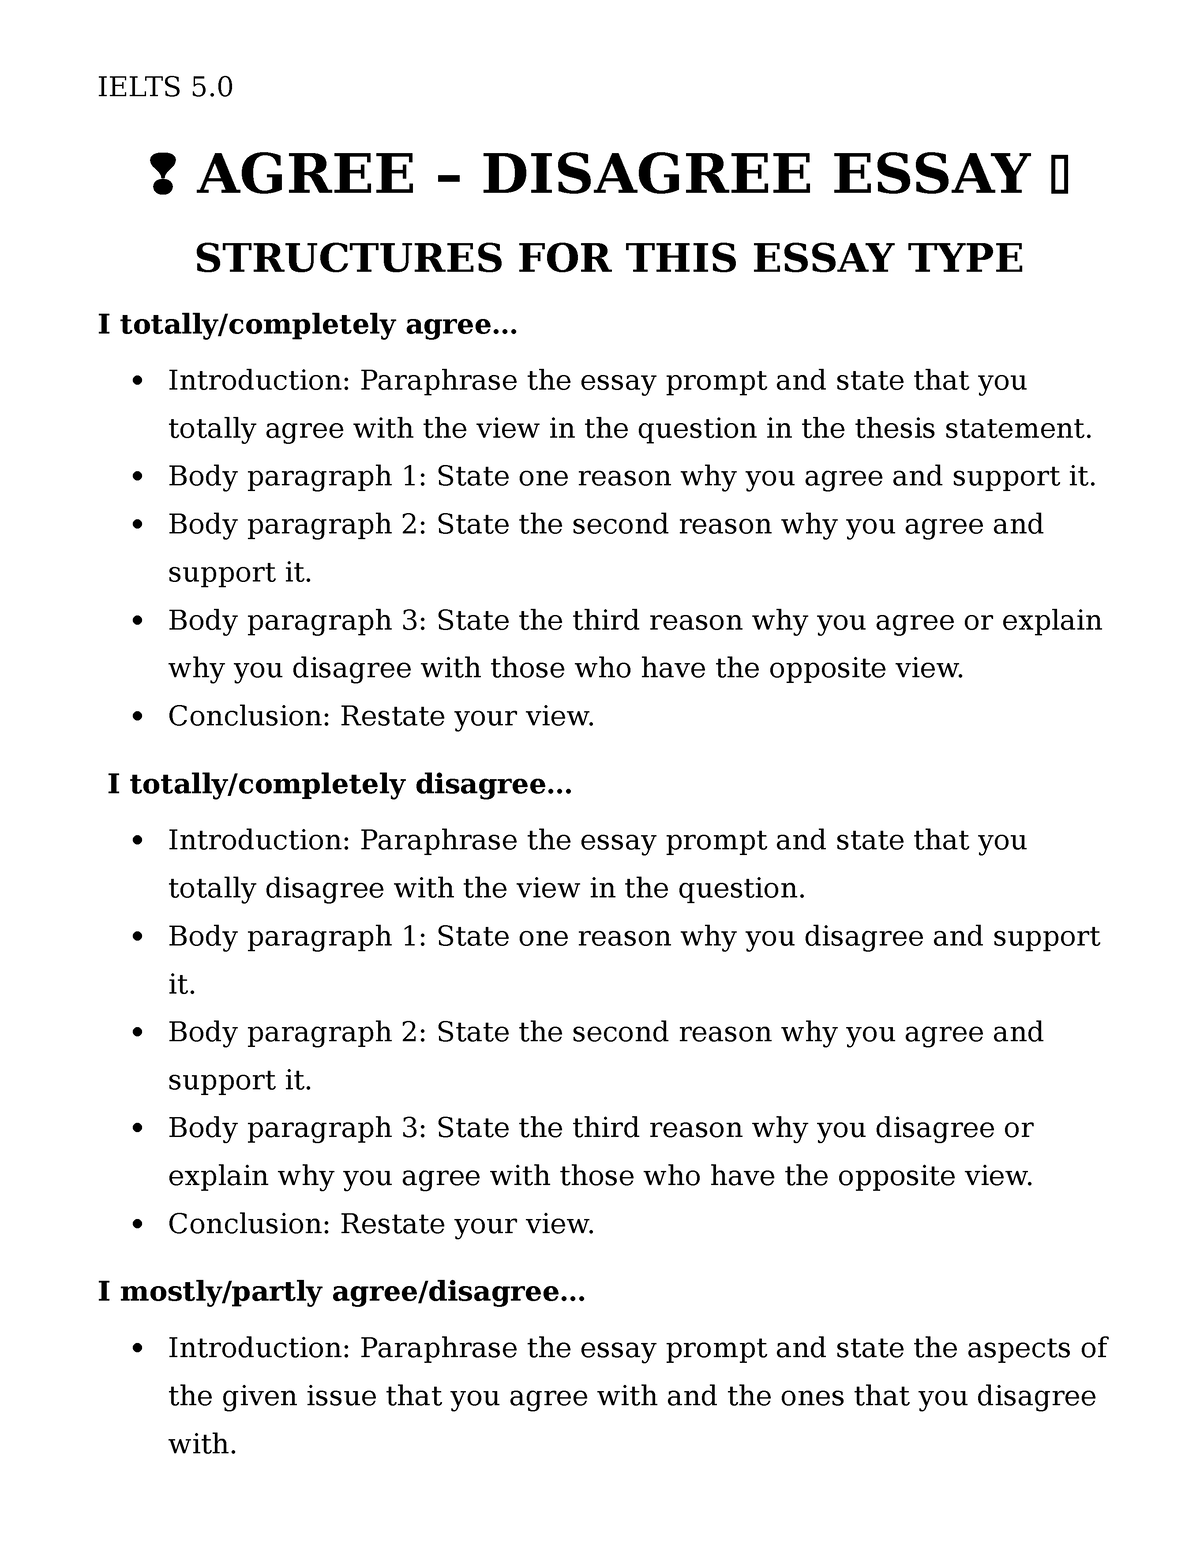 how to agree in essay